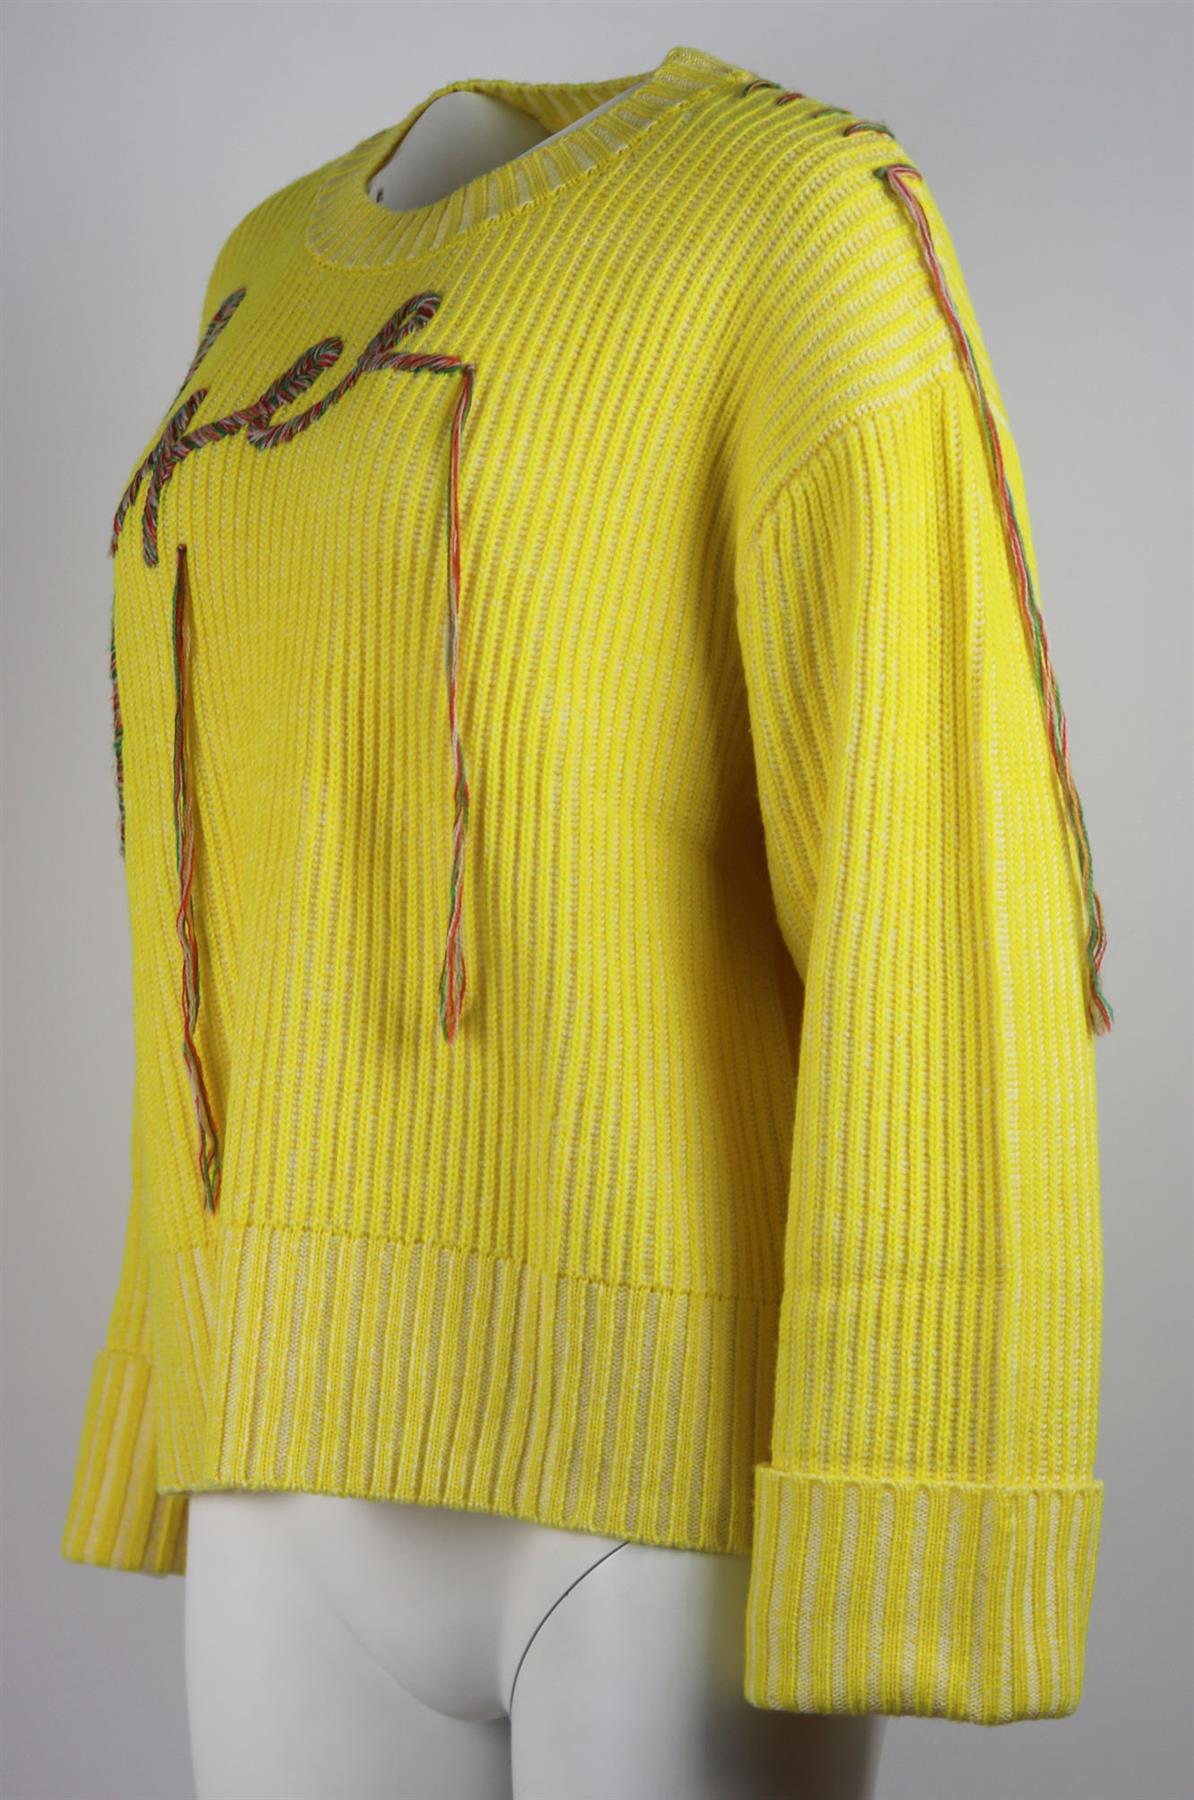 MIRA MIKATI EMBROIDERED RIBBED KNIT SWEATER FR 38 UK 10